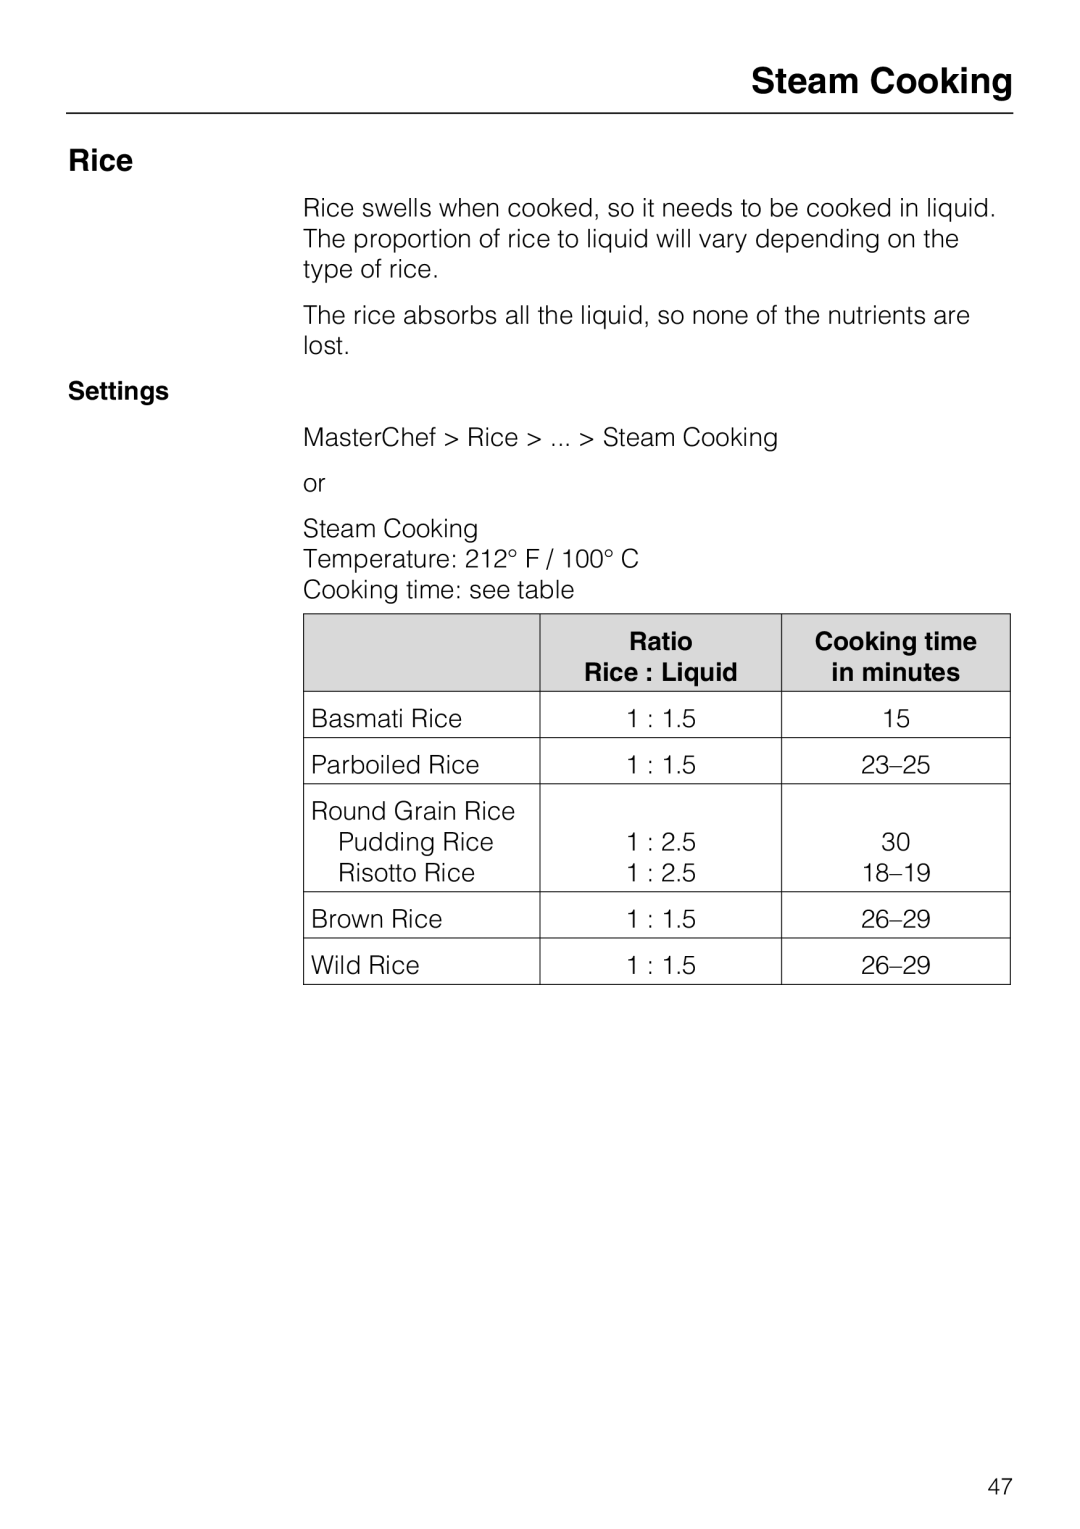 Miele 09 800 830 installation instructions Steam Cooking, Settings, Ratio, Cooking time, Rice Liquid, in minutes 